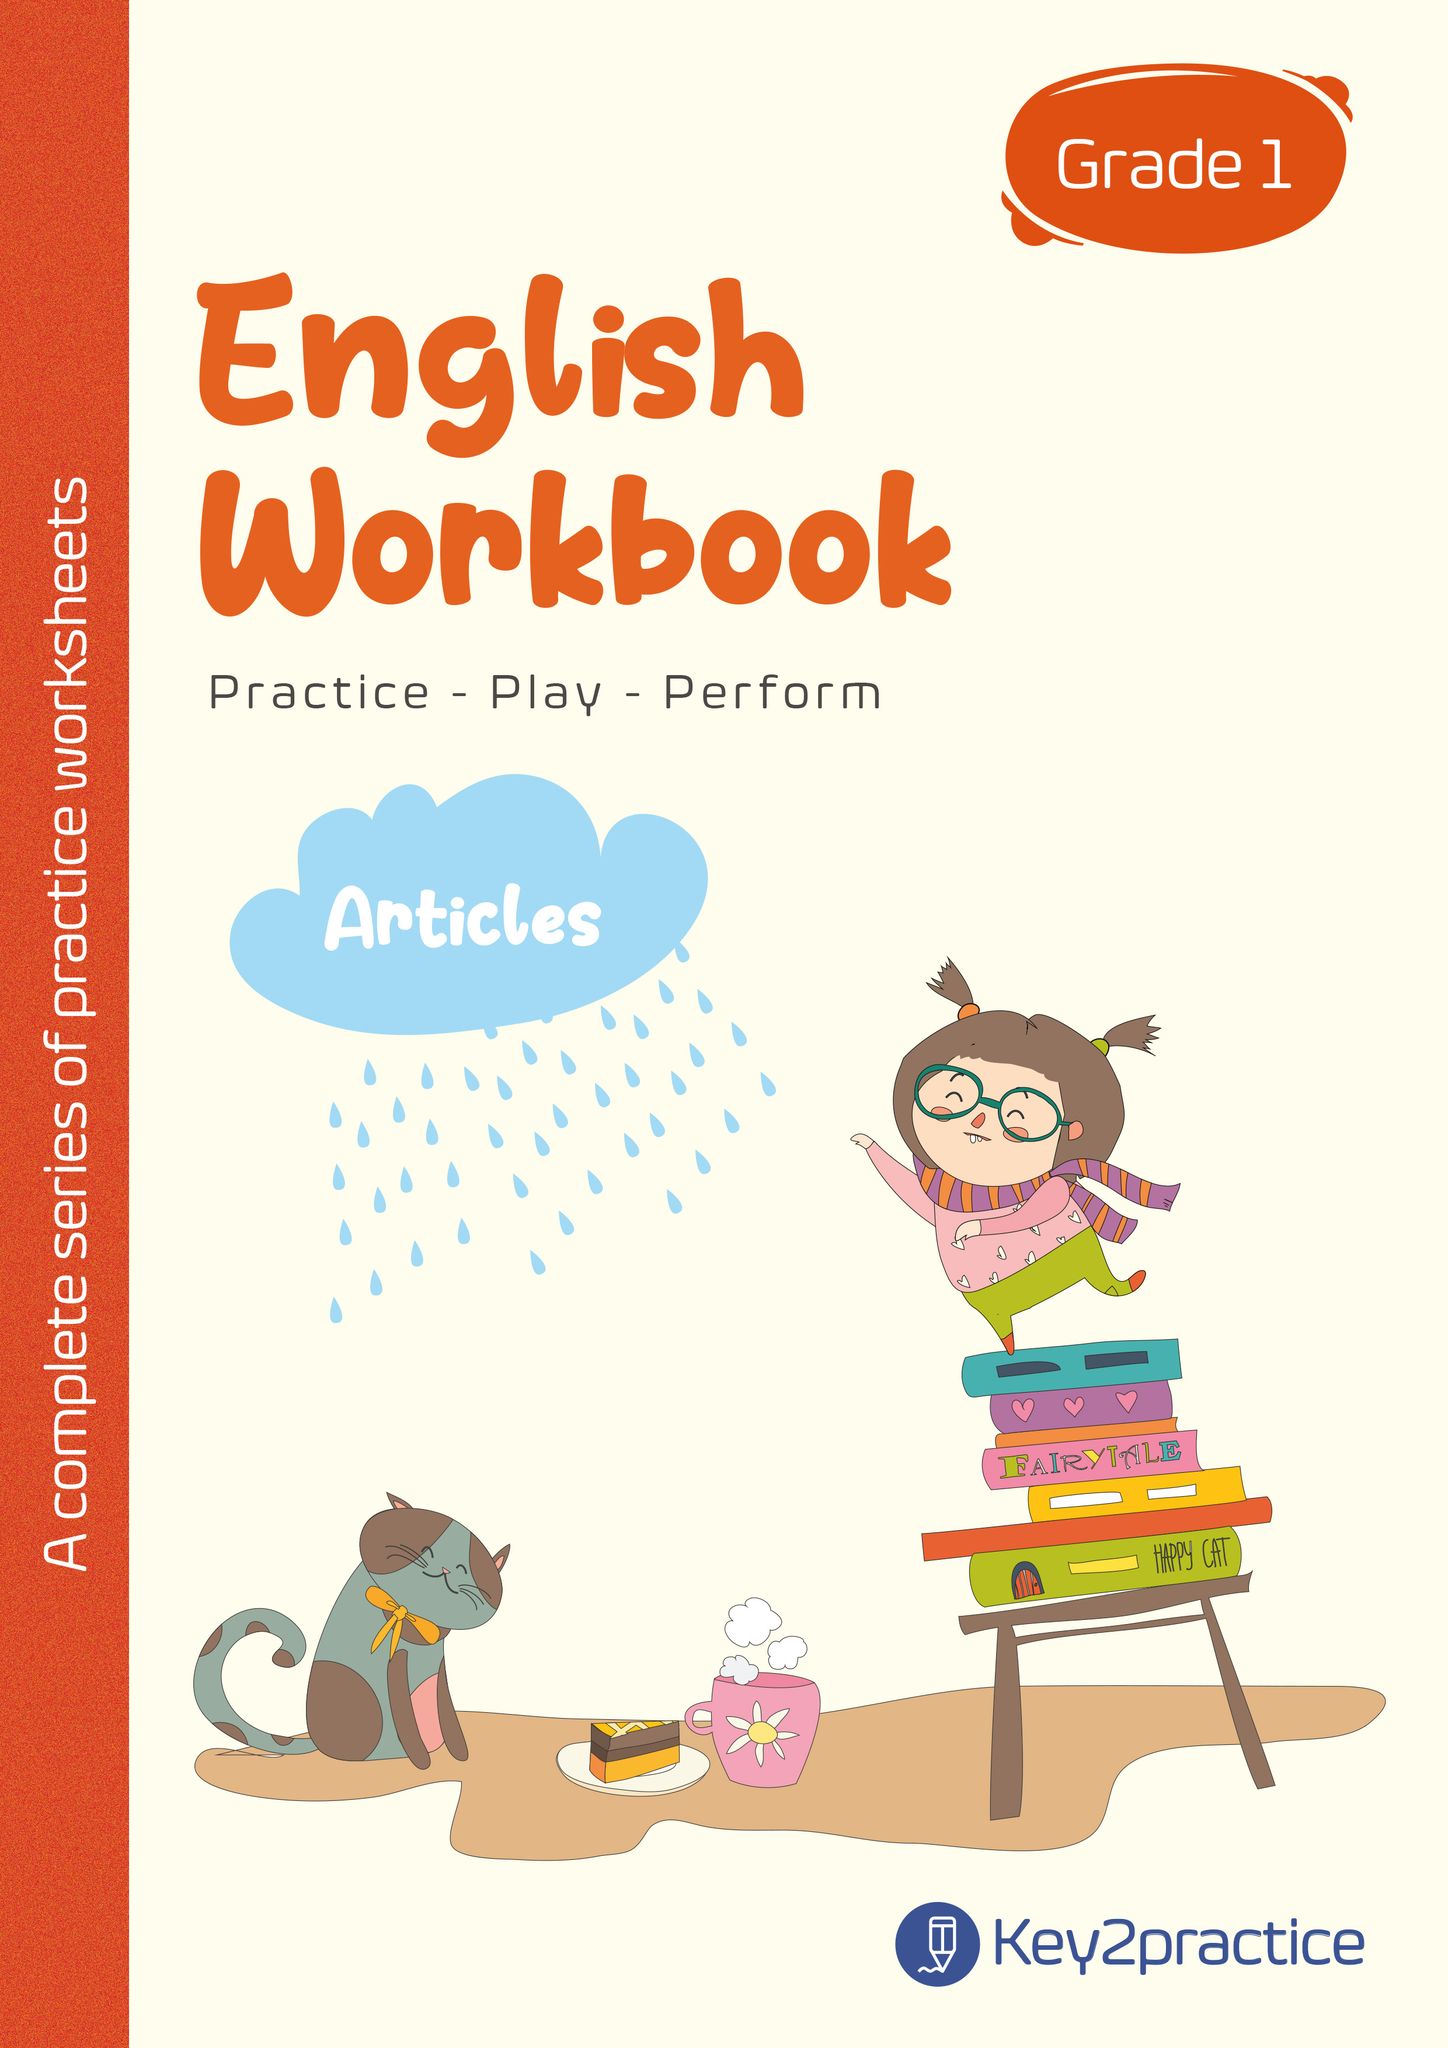 Key2practice Class 1 English Grammar Workbook | Topic - Articles | 23 Colourful Practice Worksheets with Answers | Designed by IITians